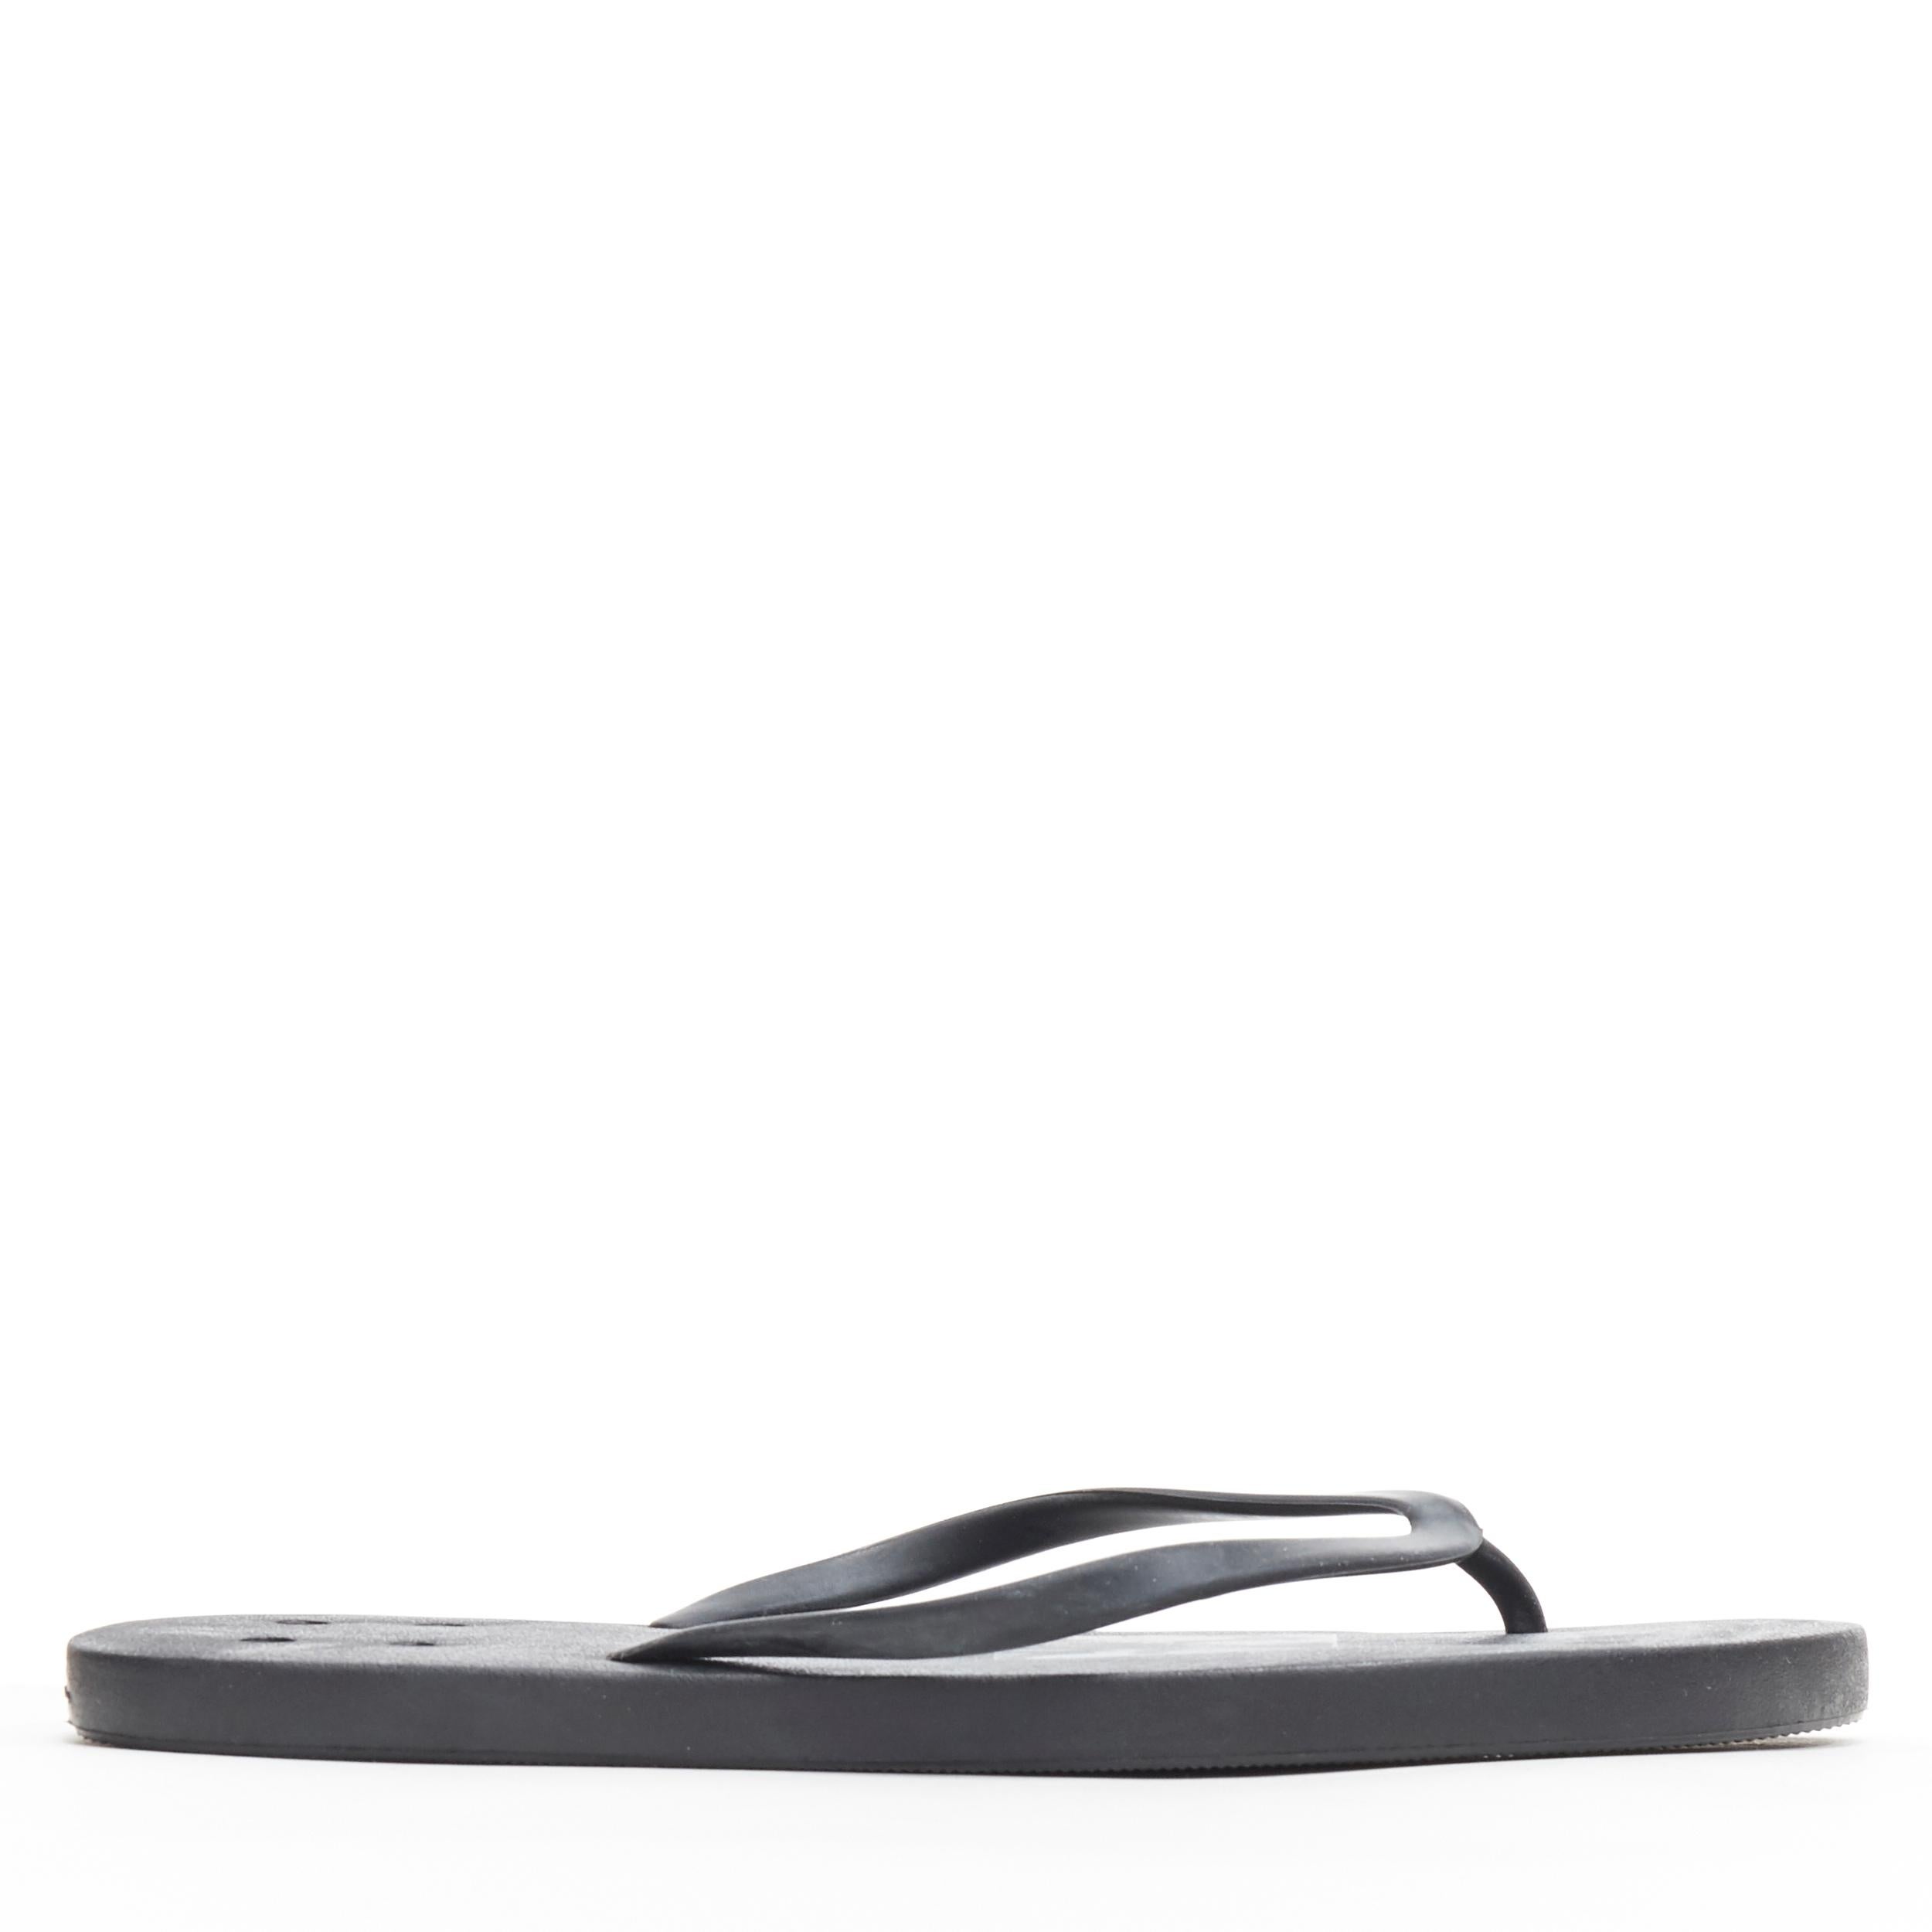 new RICK OWENS rare signature logo print punctured cut out thong slippers EU42
Brand: Rick Owens
Designer: Rick Owens
Model Name / Style: Flip Flops
Material: Rubber
Color: Black
Pattern: Solid
Extra Detail: Rare logo print footbed.

CONDITION: